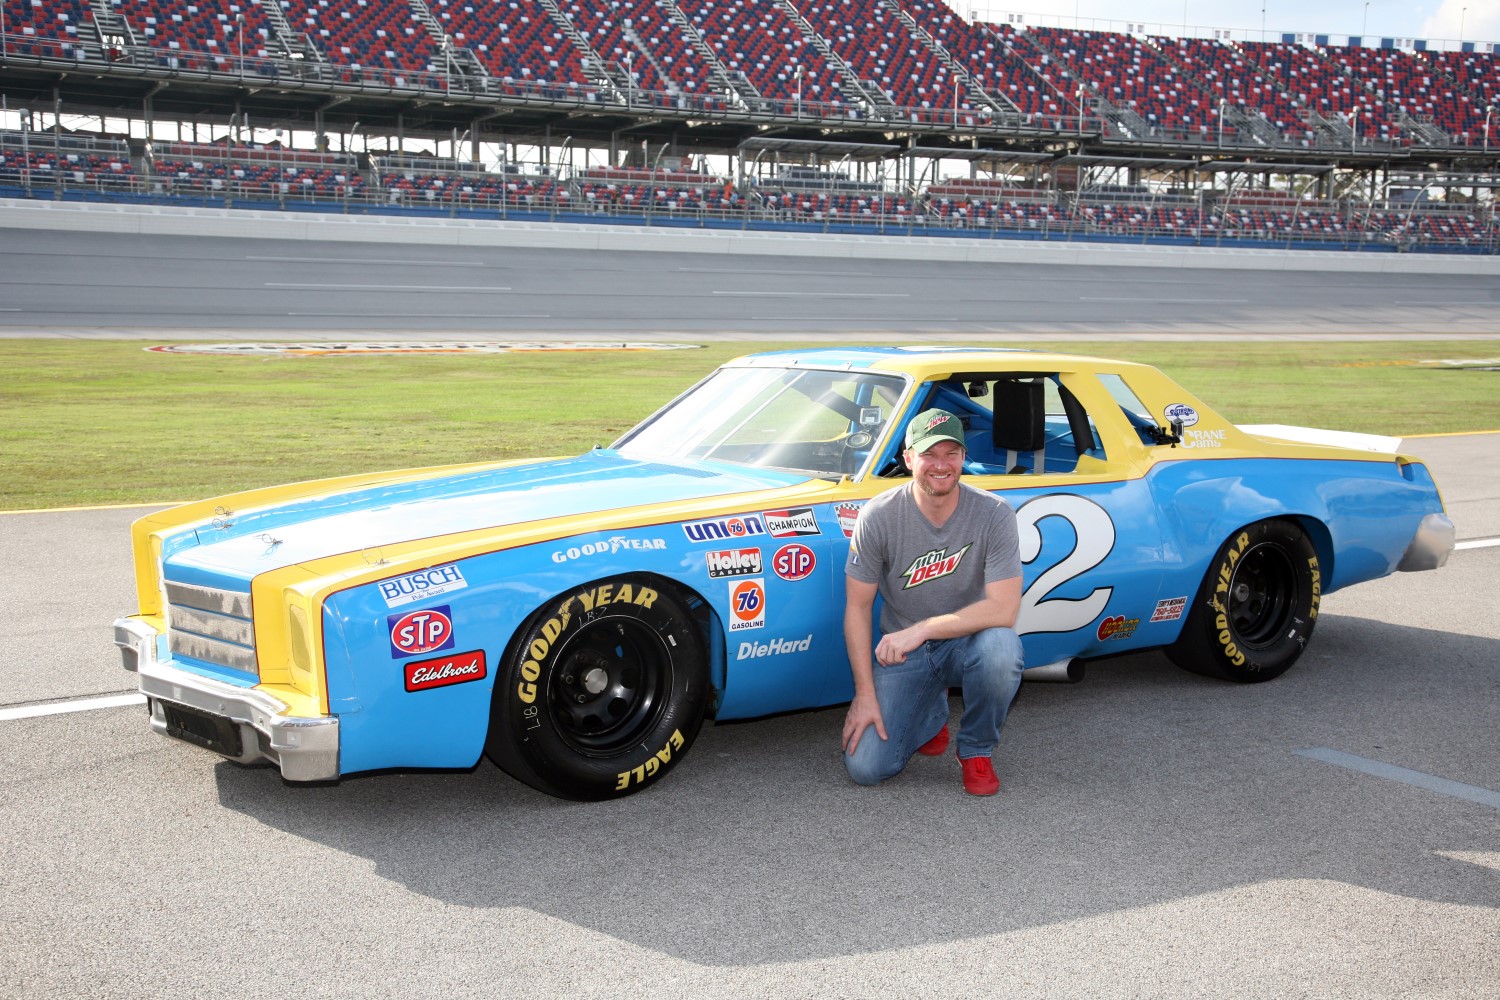 The iconic No. 2 Chevrolet Monte Carlo, driven by Dale Earnhardt Sr. to the 1979 Rookie of the Year Award and the 1980 NASCAR premier series title, was presented to Dale Jr., who will make his final start at Talladega in Sunday’s Alabama 500.